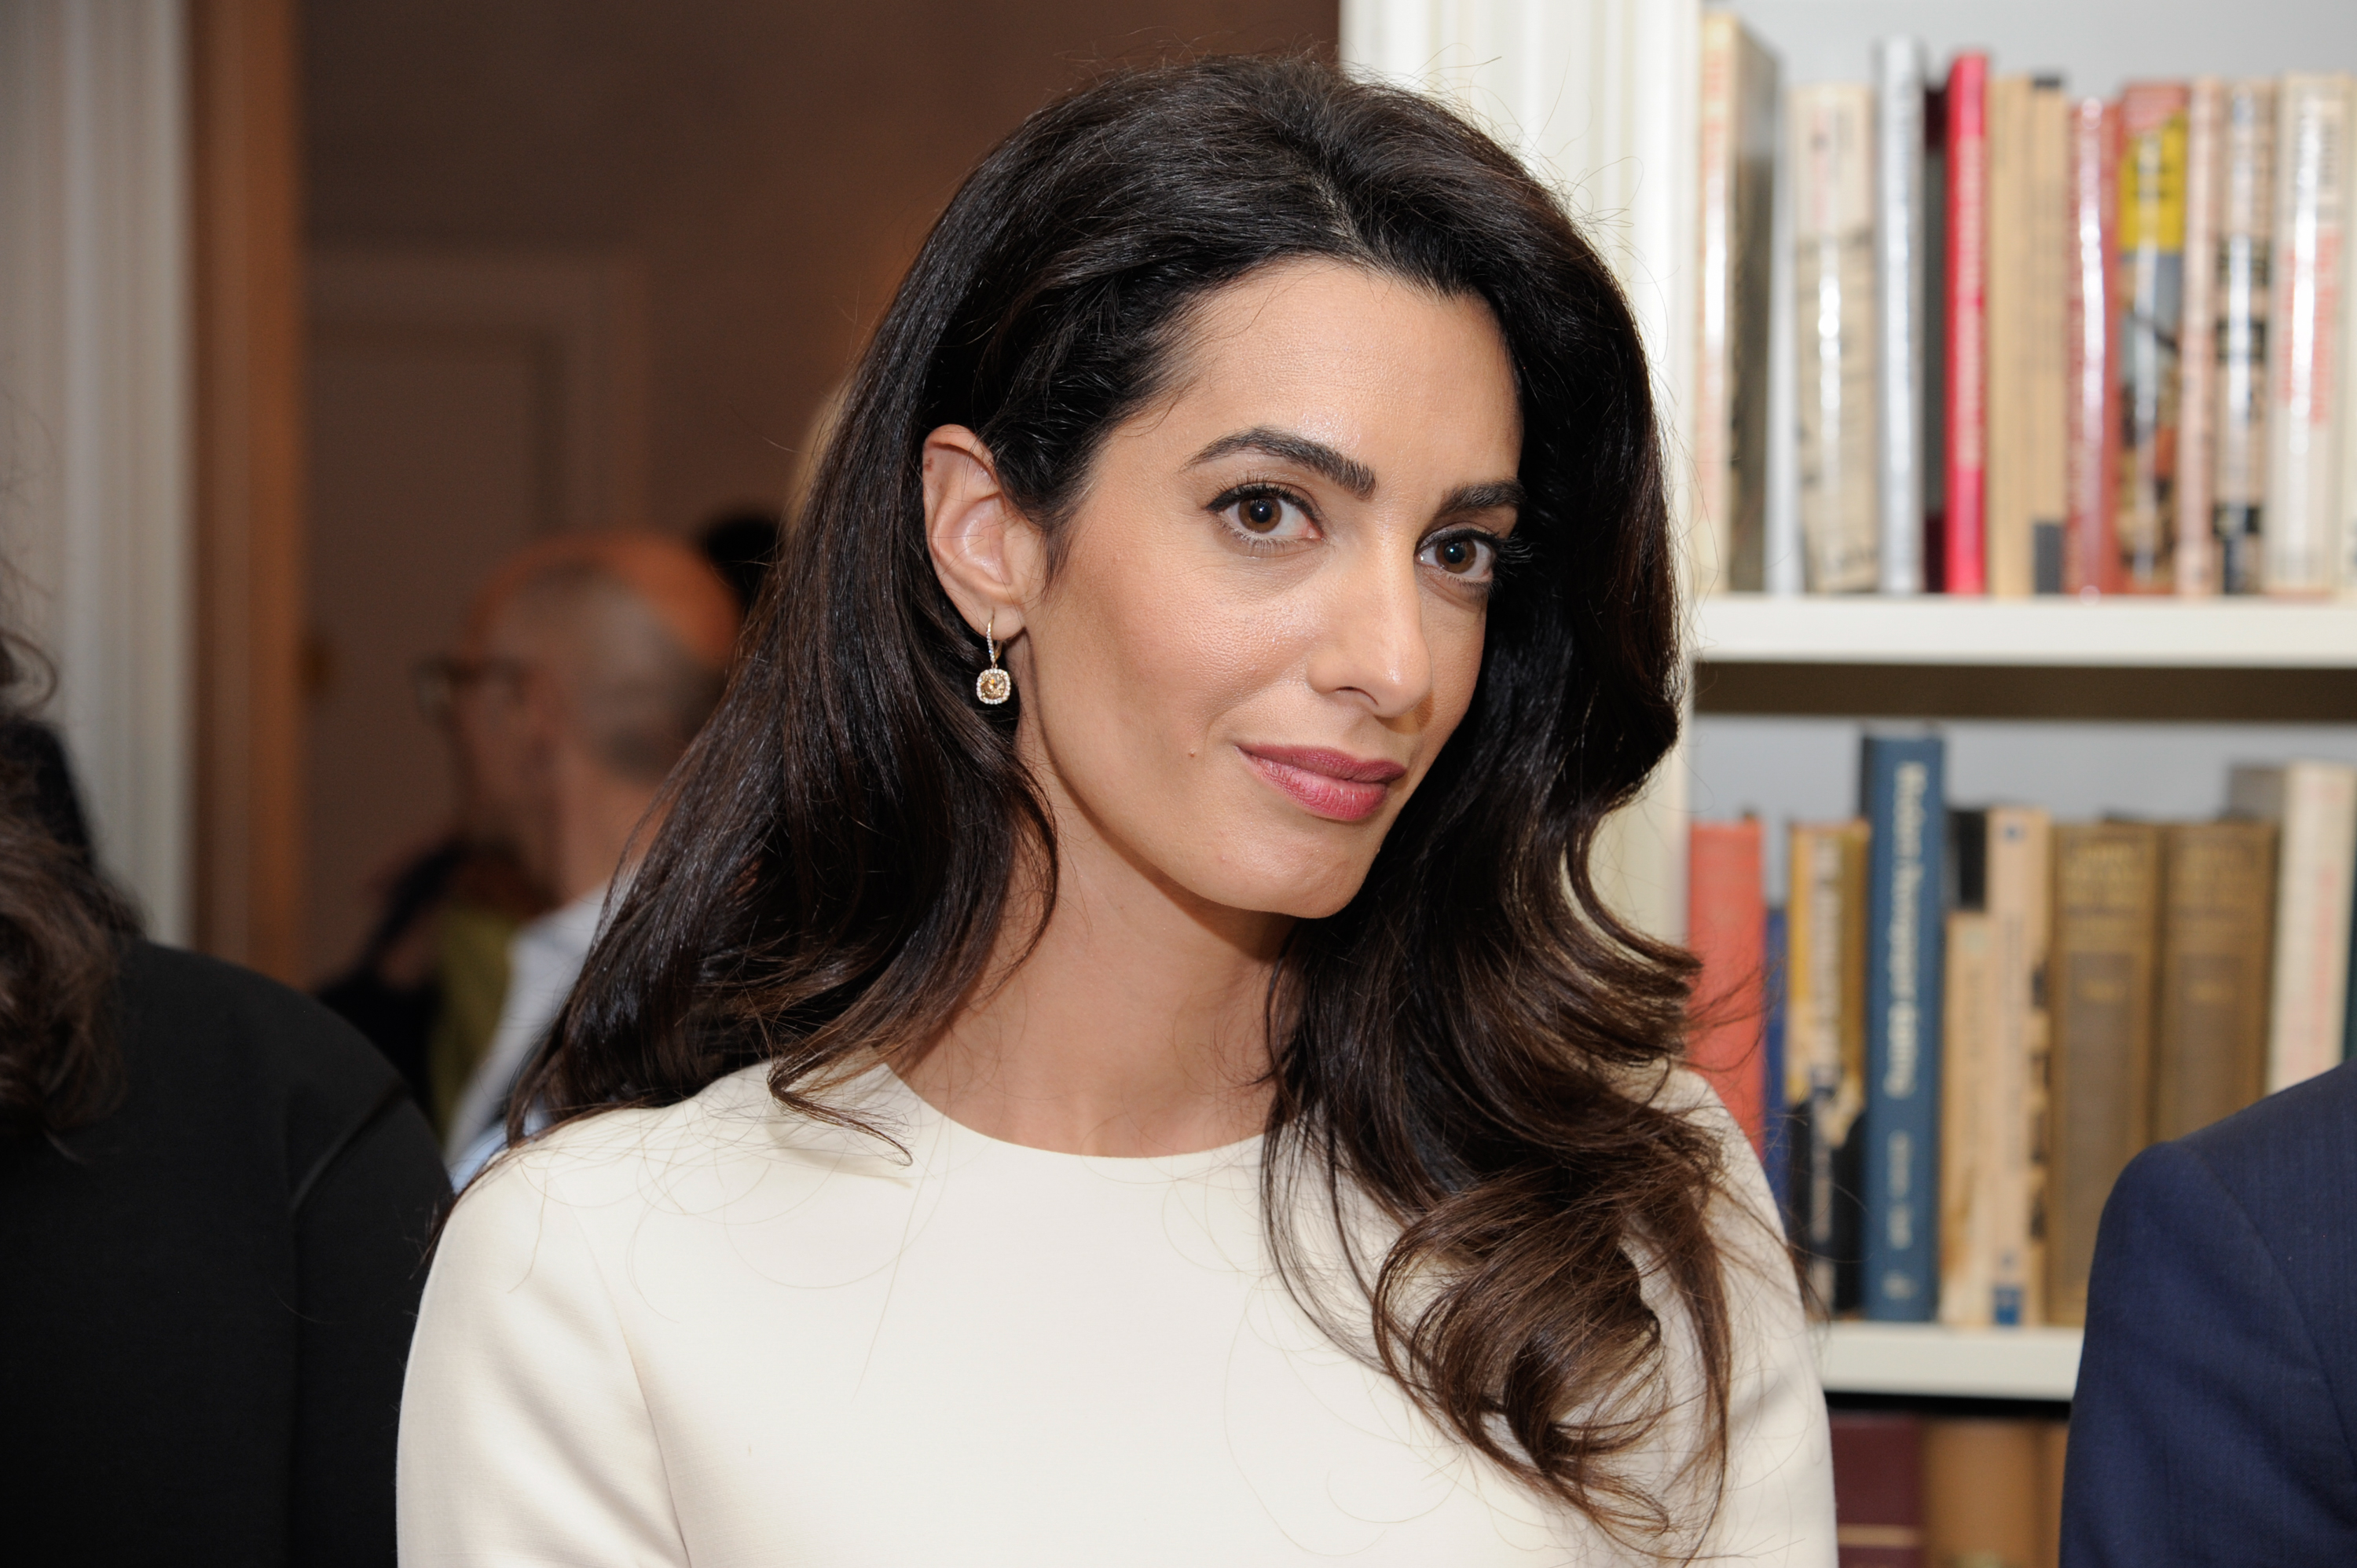 Amal Clooney attends the Women In The World reception honoring appointment of UN Office on Drugs and Crime Goodwill Ambassador Nadia Murad on September 16, 2016 in New York City.